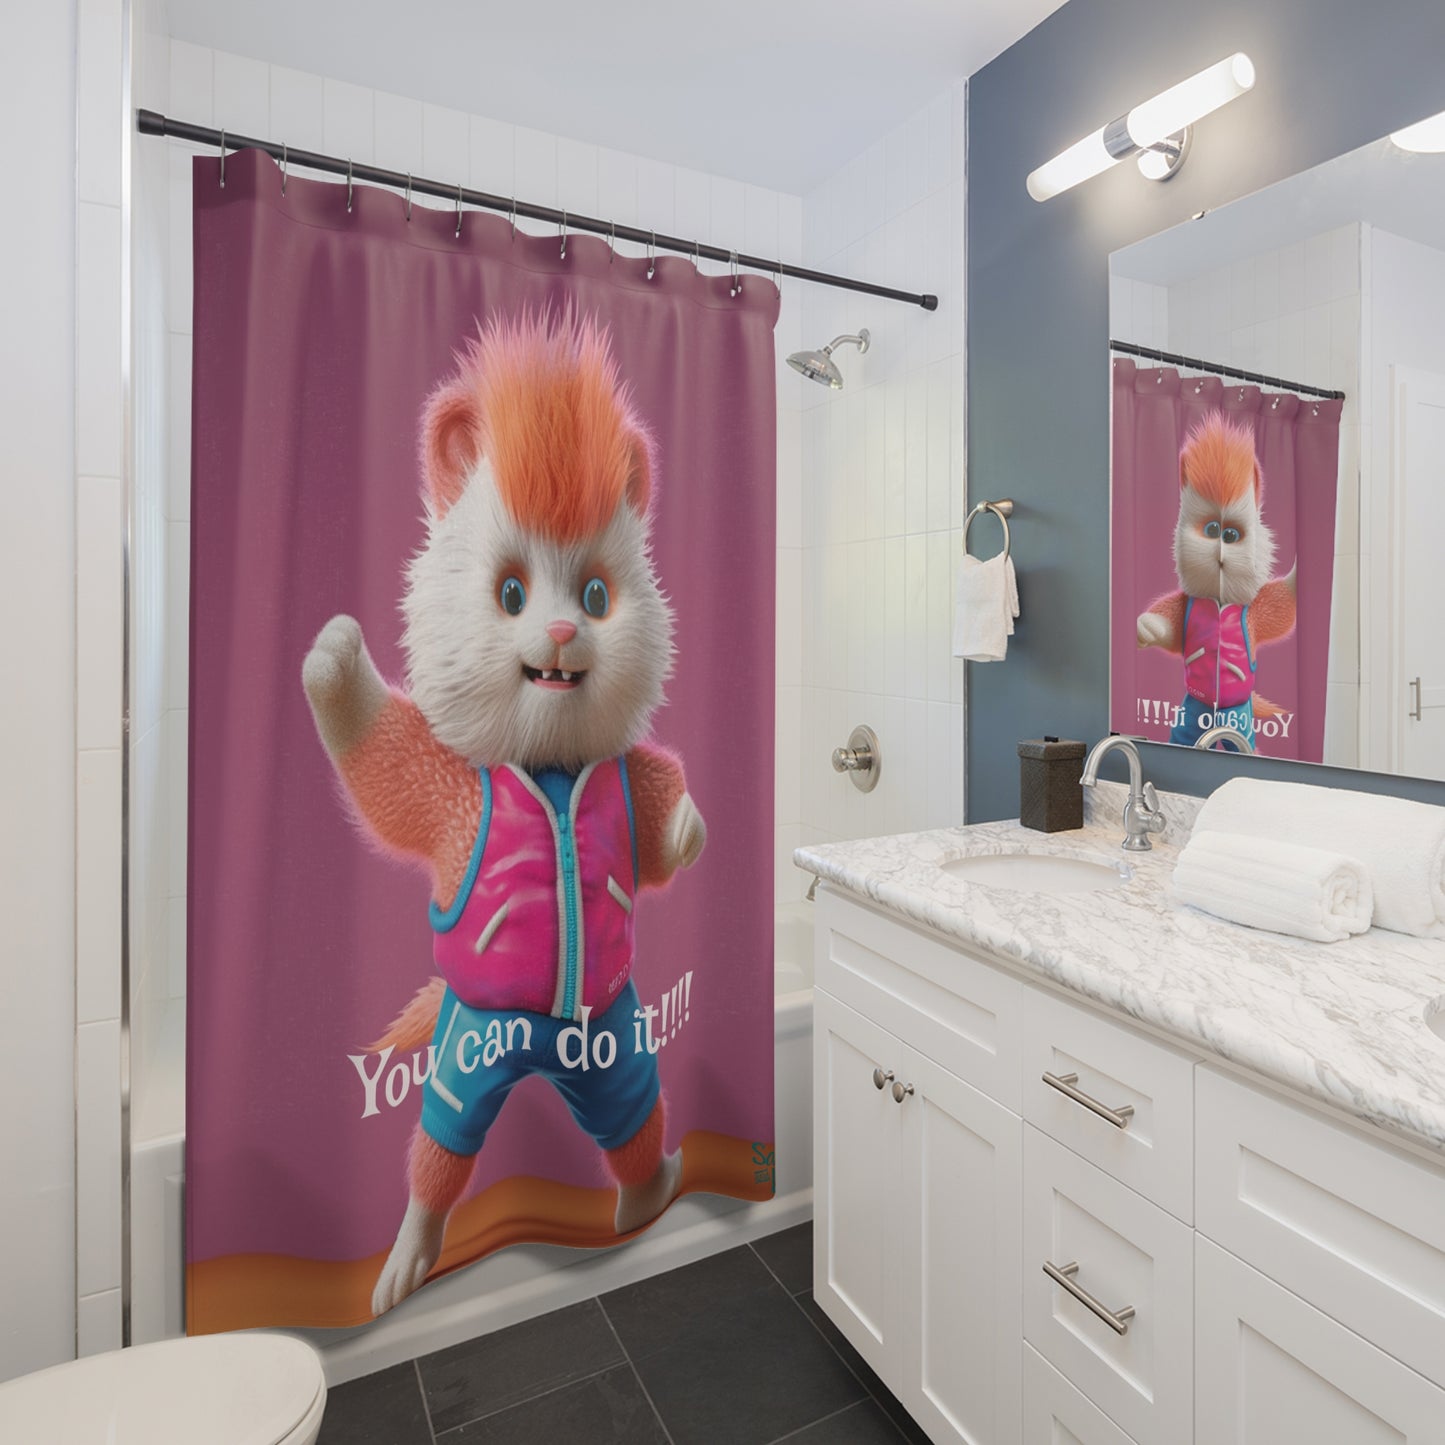 Motivational Shower Curtain - Aerobics Cat Says 'You Can Do It